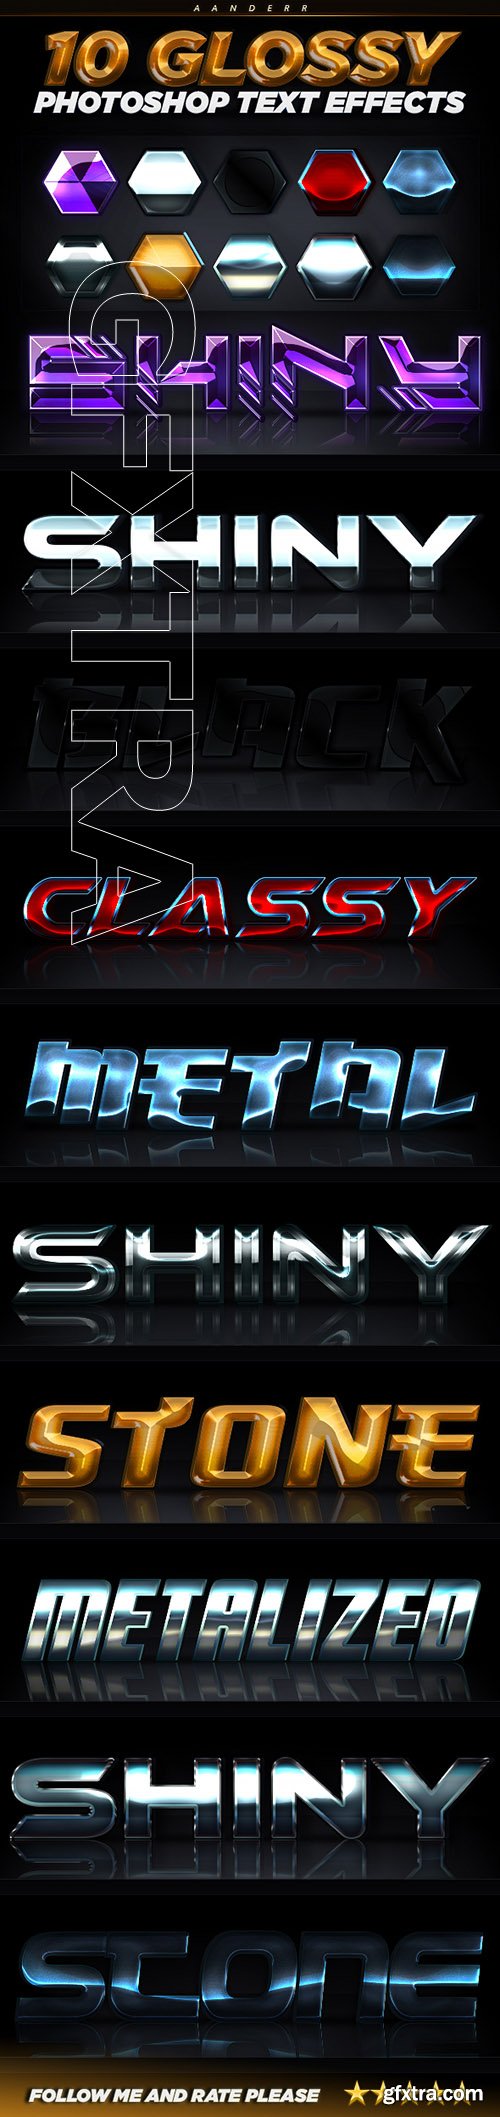 GraphicRiver - 10 Glossy Photoshop Text Effects 22885599